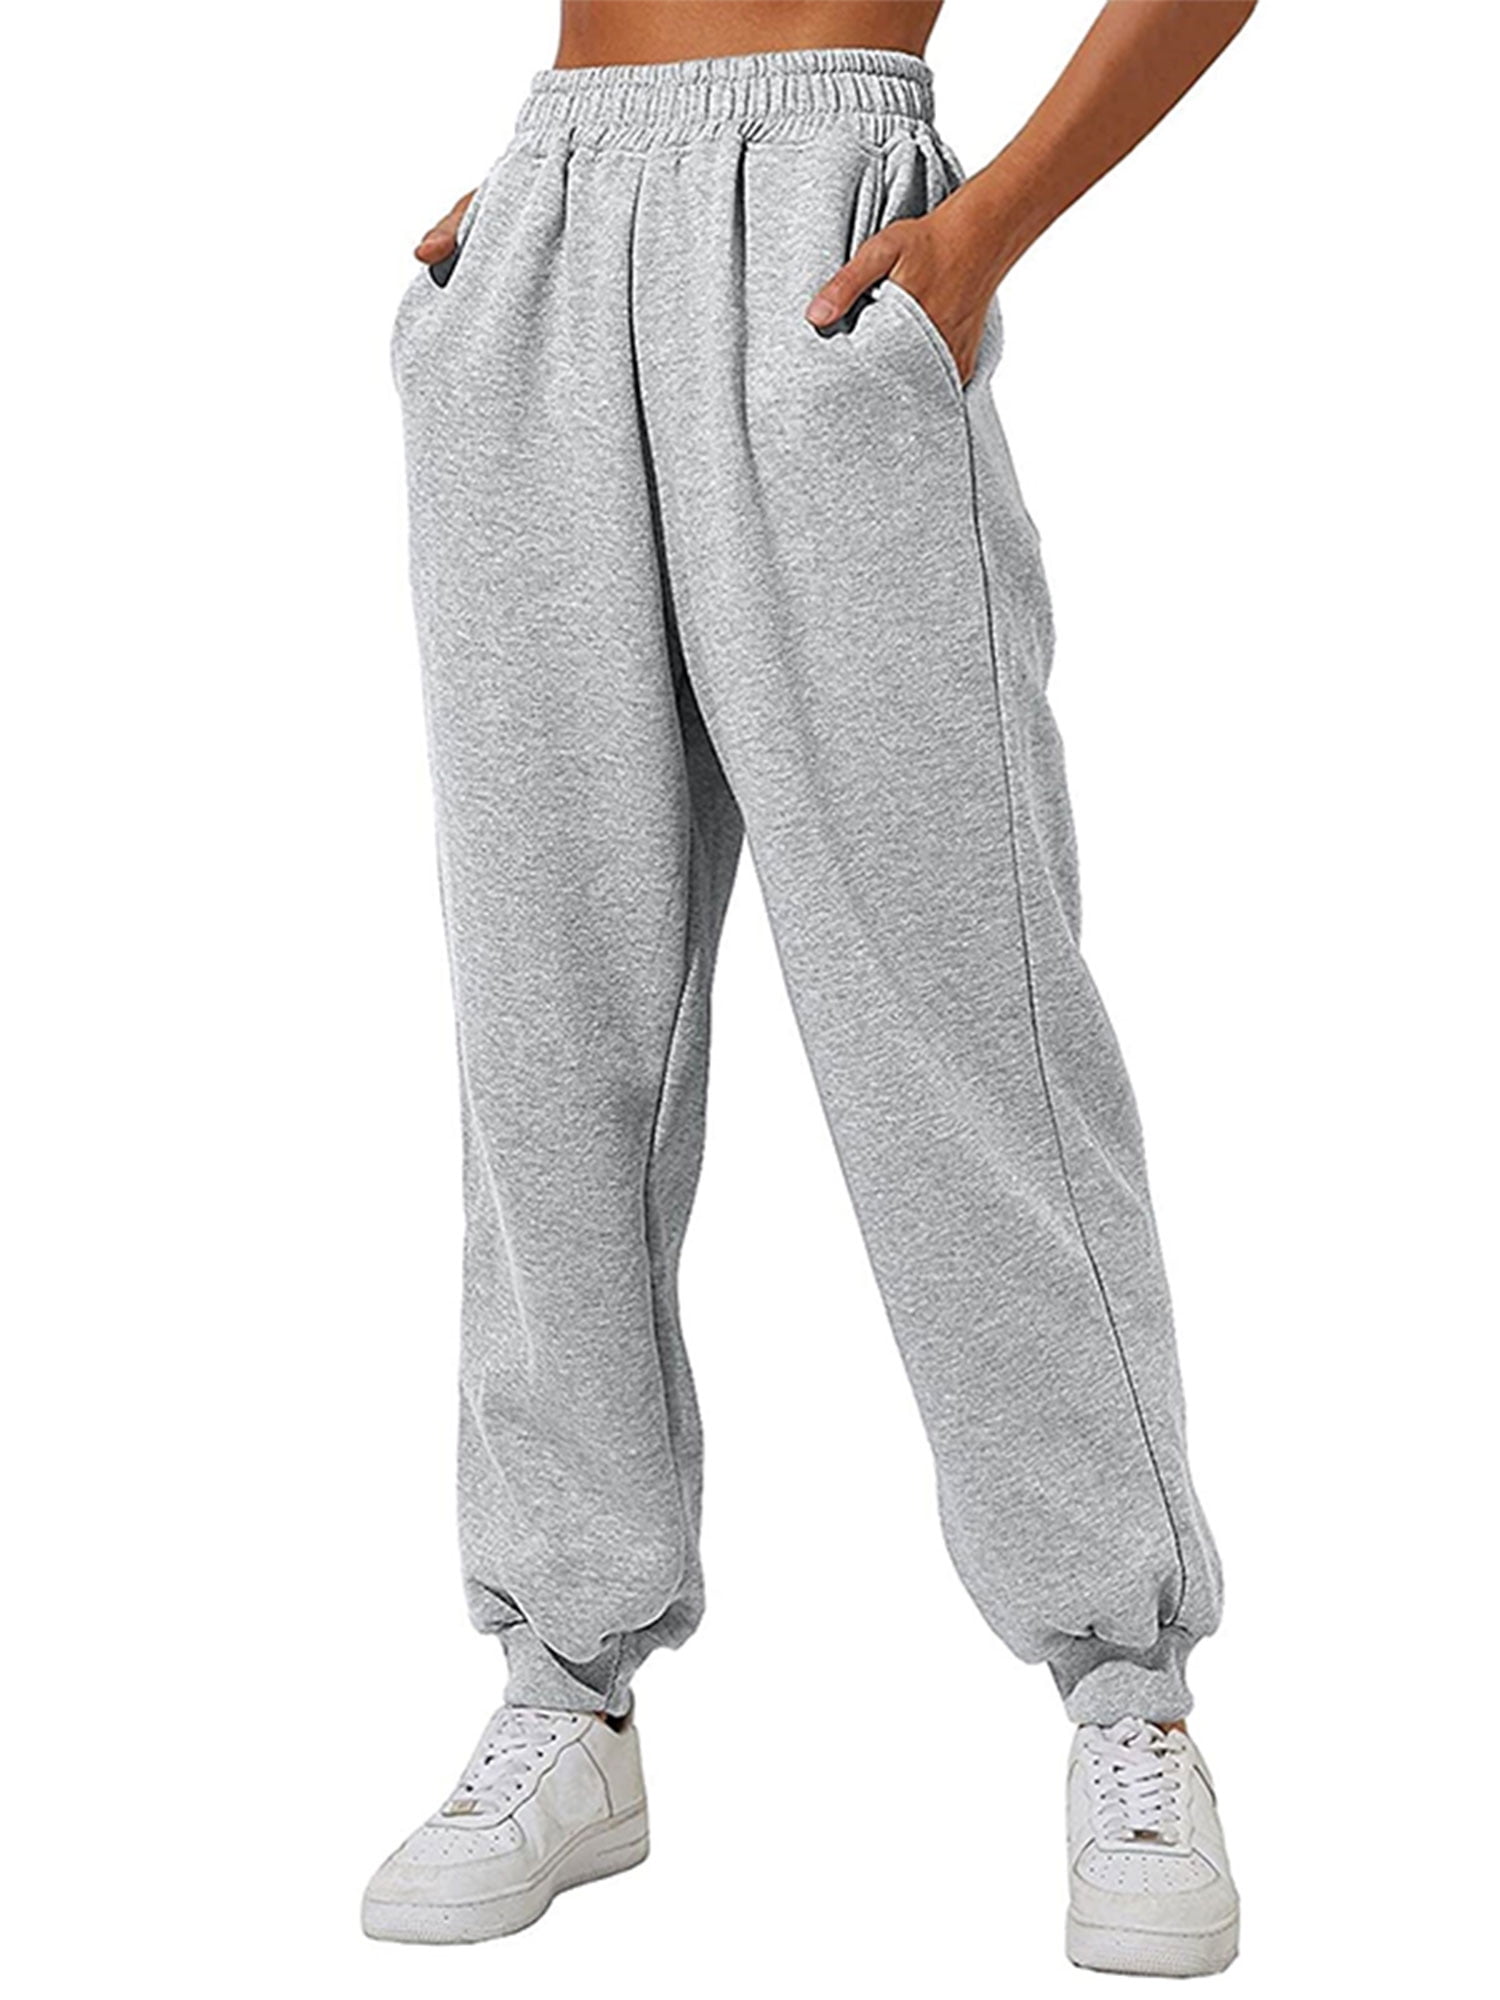 icyzone Capri Sweatpants for Women - French Terry Workout